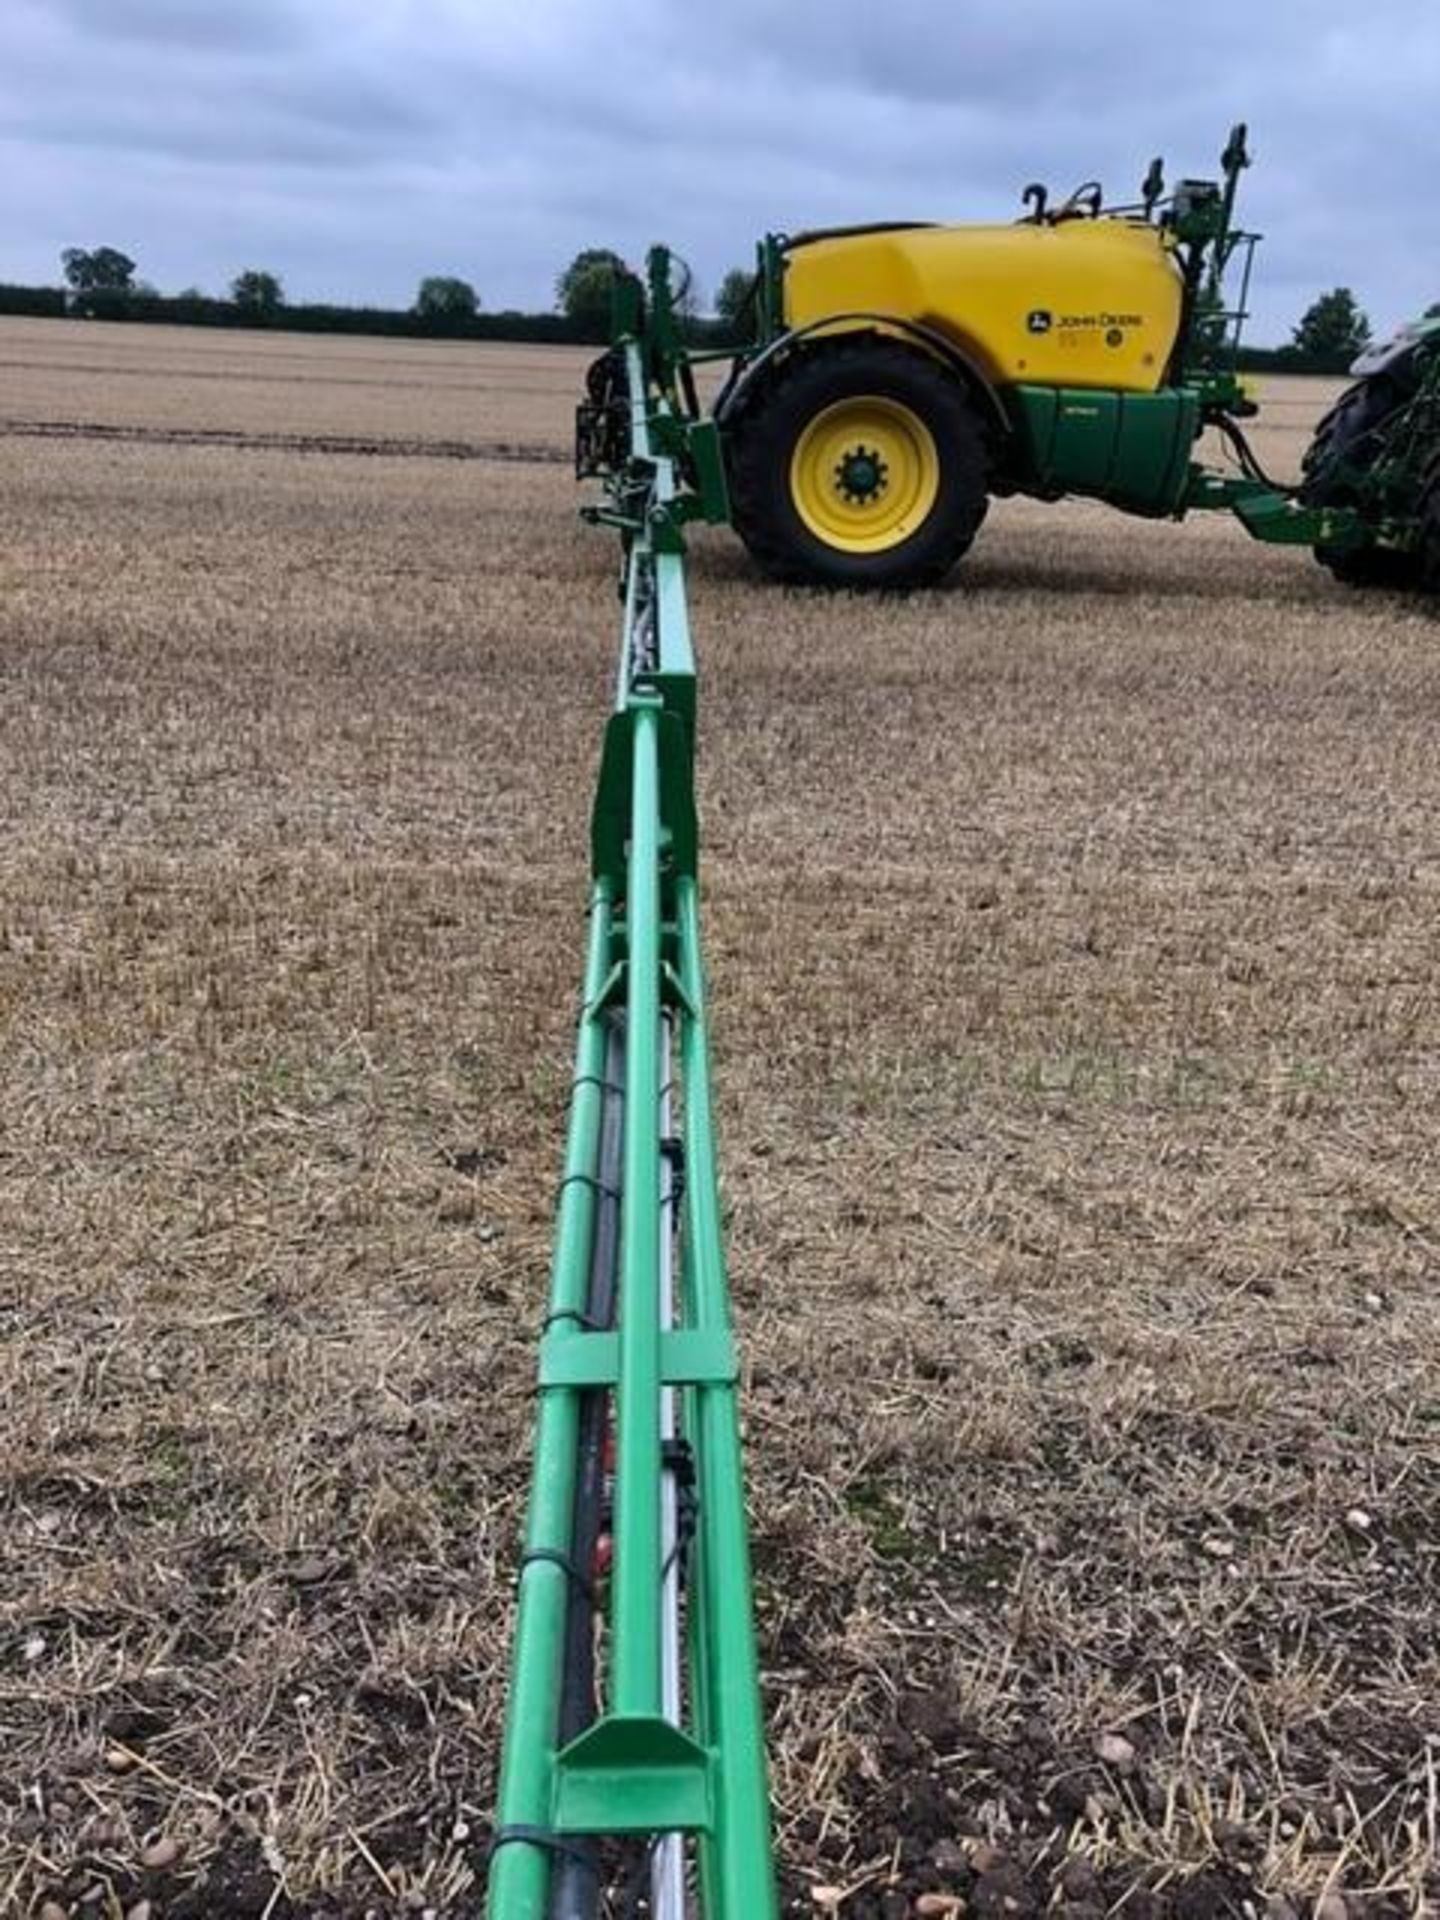 2017 John Deere M740i 24m trailed sprayer, 4000l tank on 520/85R38 wheels and tyres. Hectares: c.12, - Image 9 of 14